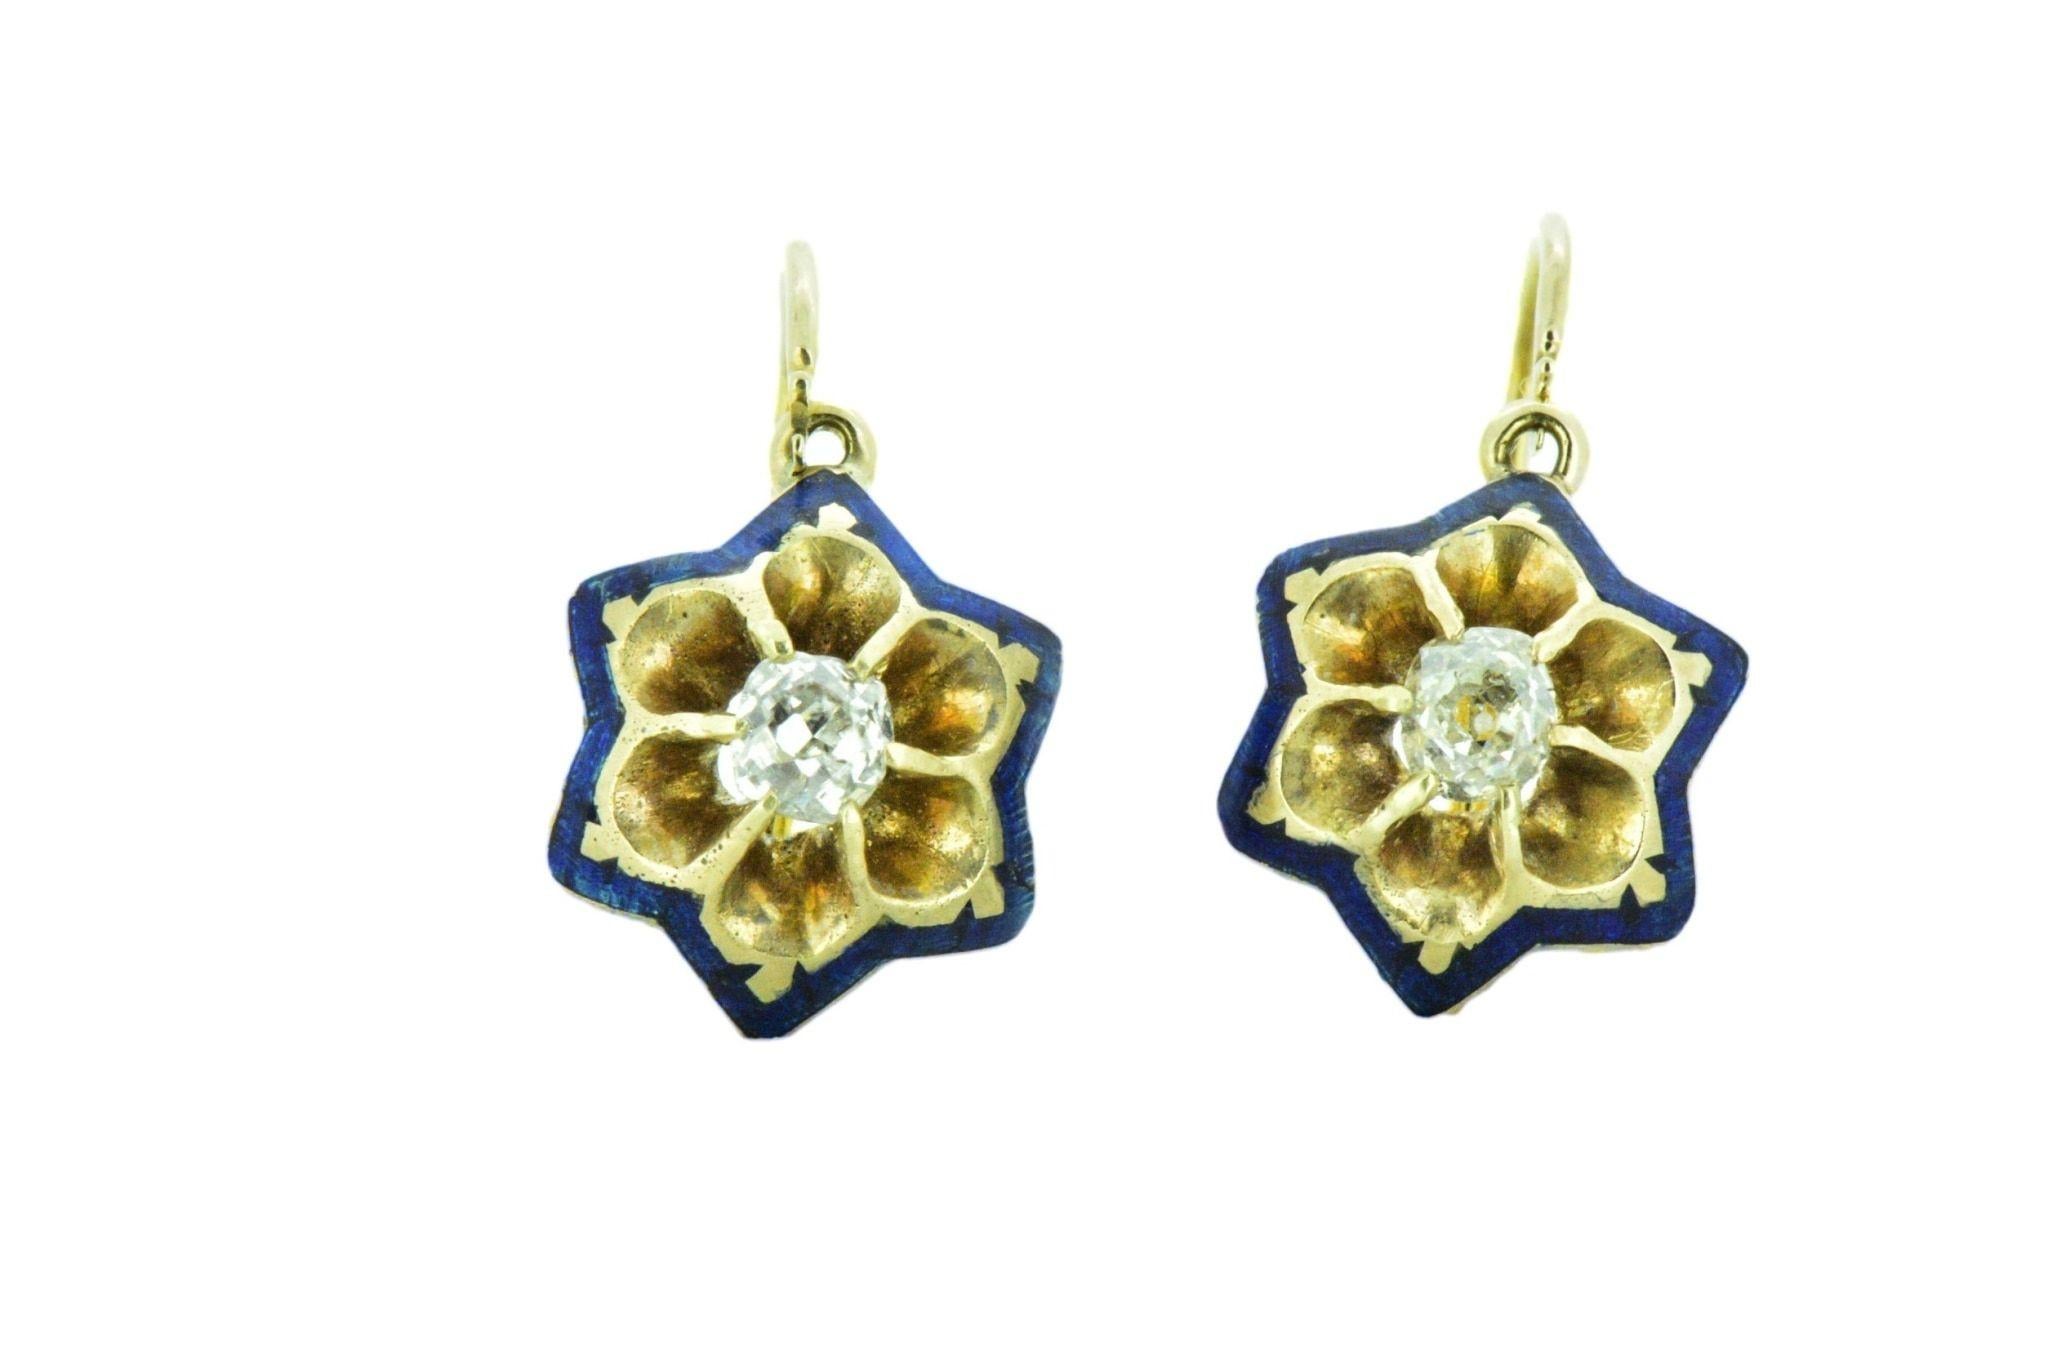 Here is a delightful pair of Victorian enamel and diamond earrings.  Royal blue enamel delicately accents the edges of the star earrings. Each earring is set with an old mine diamond .36 carat total weight. The old mine diamonds are eye clean and